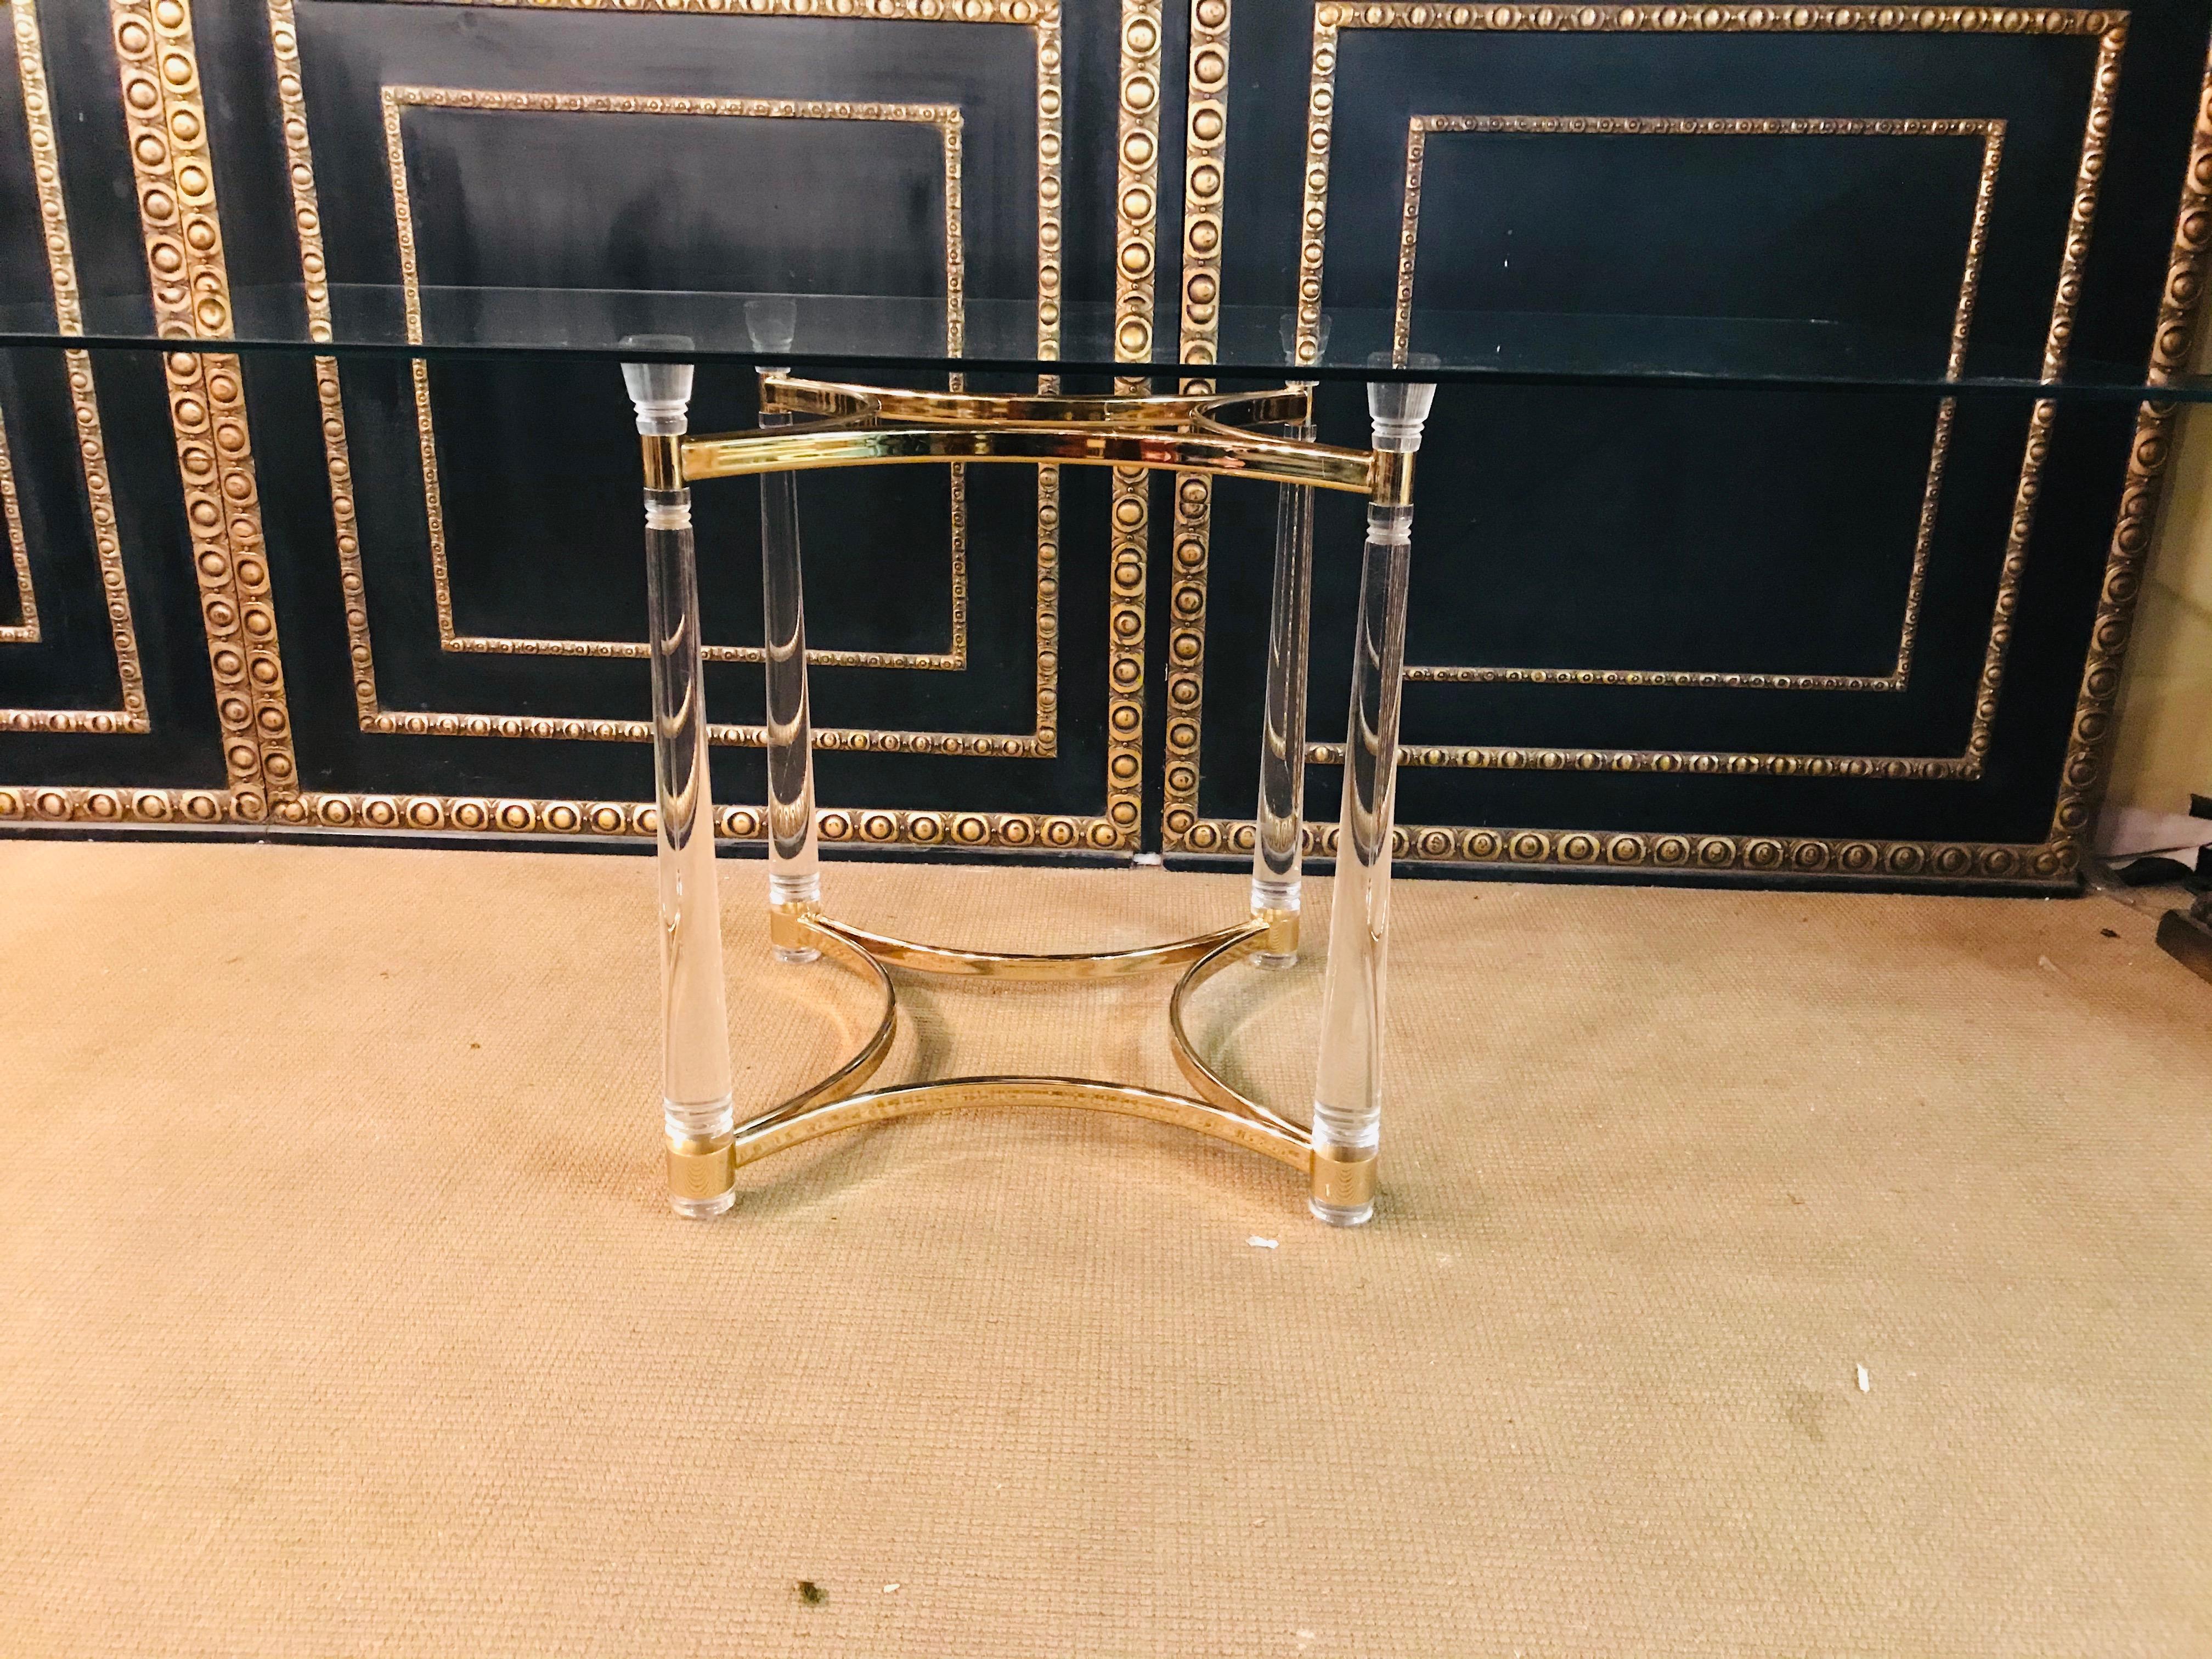 Italian Acrylic Dining Table with Four Collumns Legs and rectangular Glass Plate